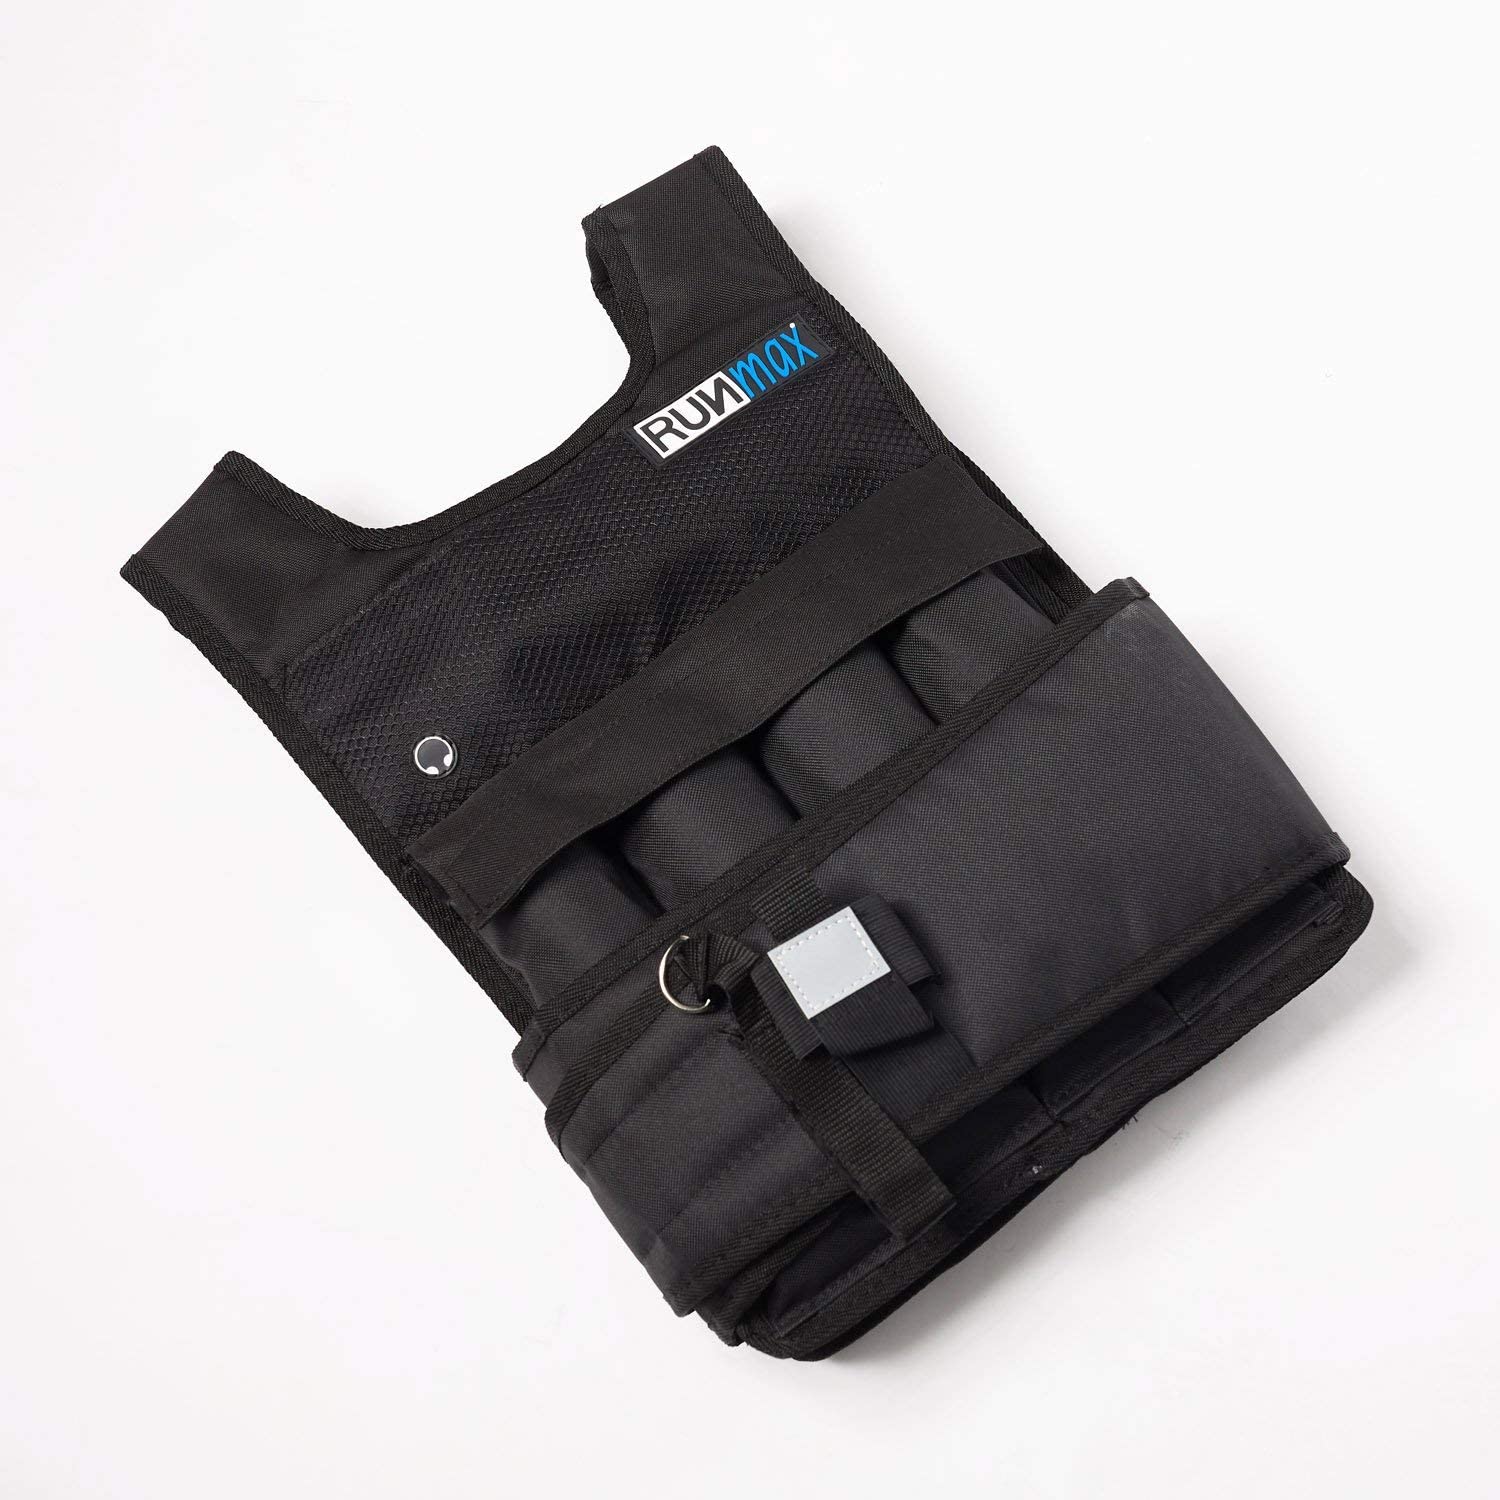 RUNmax Pro Weighted Vest